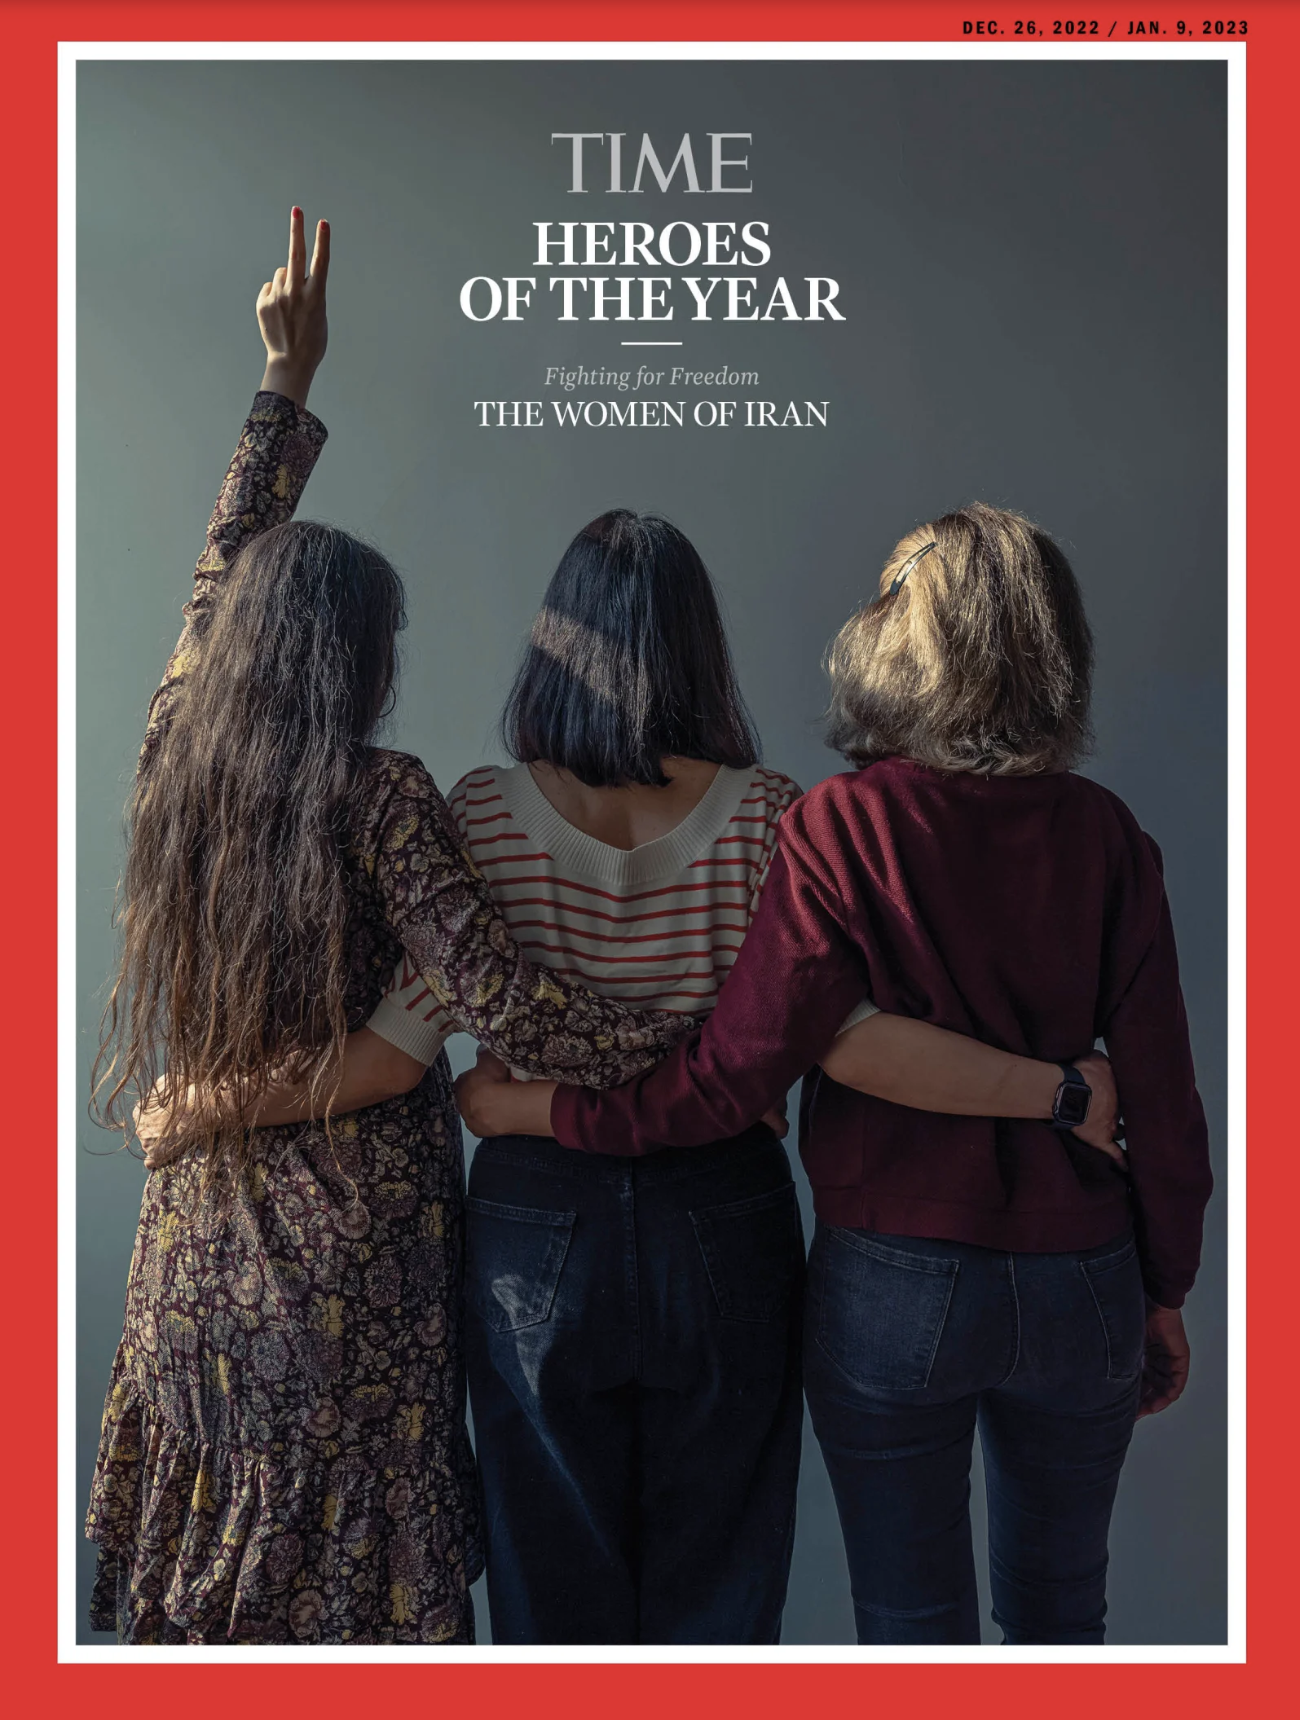 TIME Magazine chooses "The Women of Iran" as its 2022 Heroes of the Year.